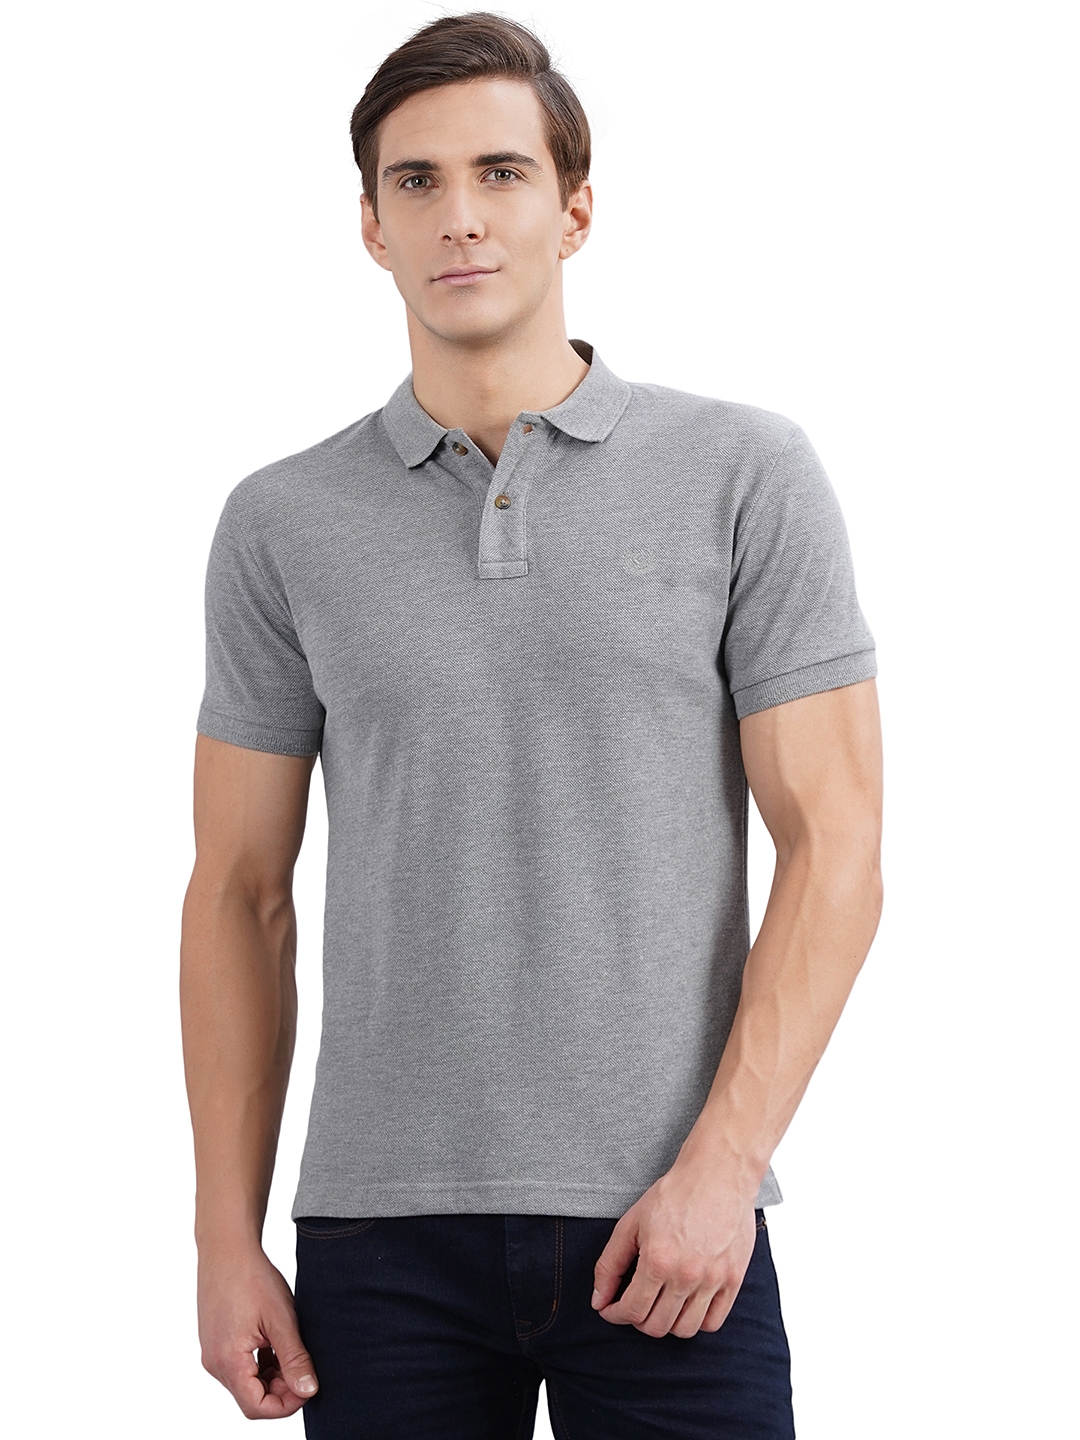 Greenfibre | Grey Solid Slim Fit Polo T-Shirt | Greenfibre 0